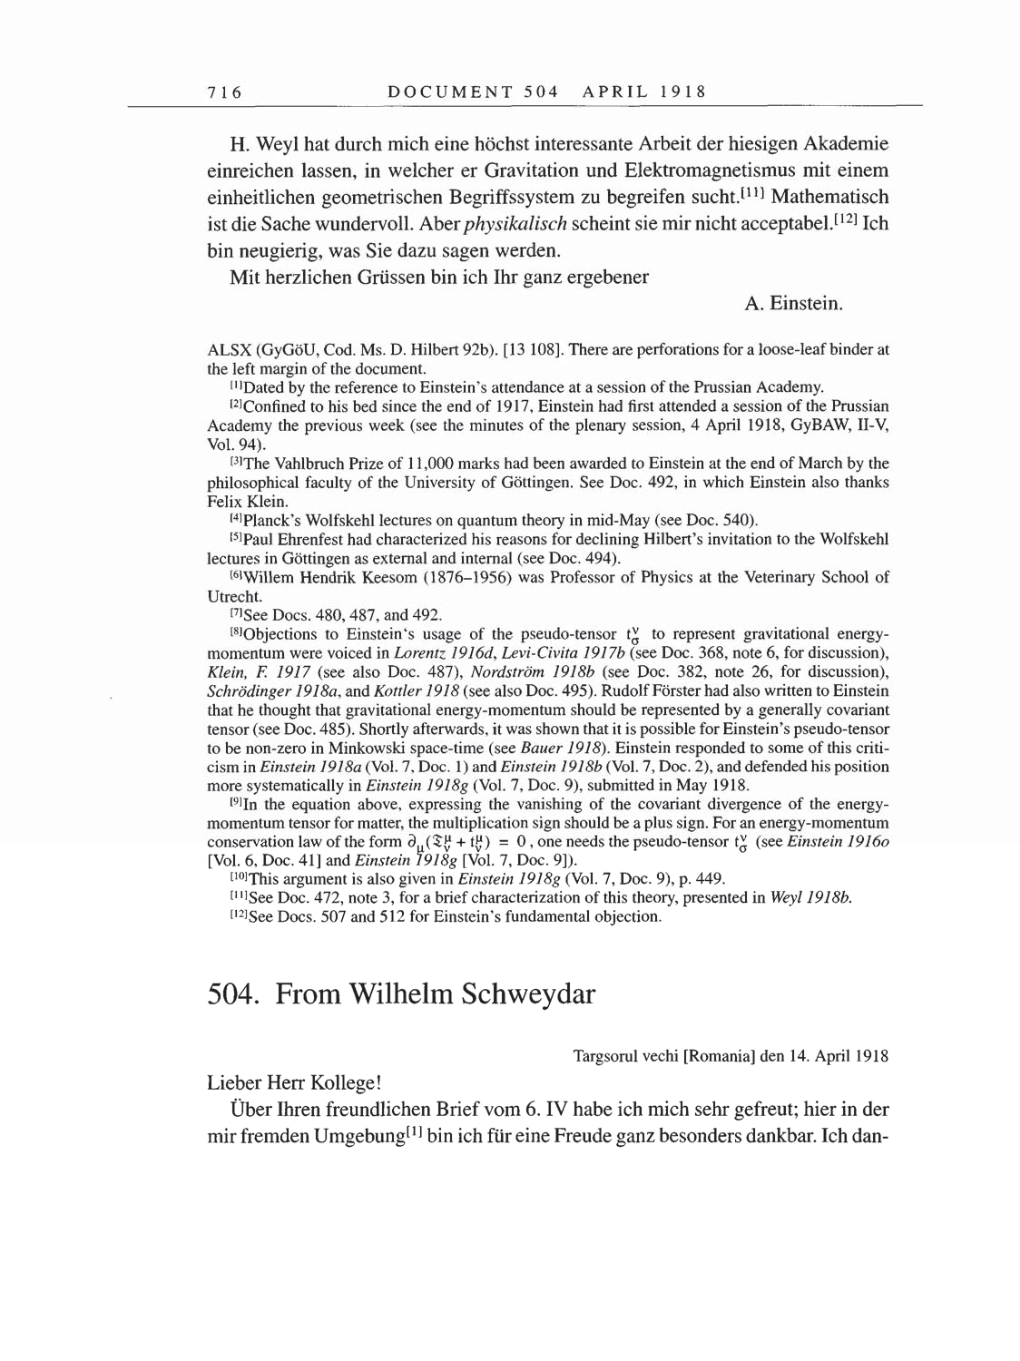 Volume 8, Part B: The Berlin Years: Correspondence 1918 page 716